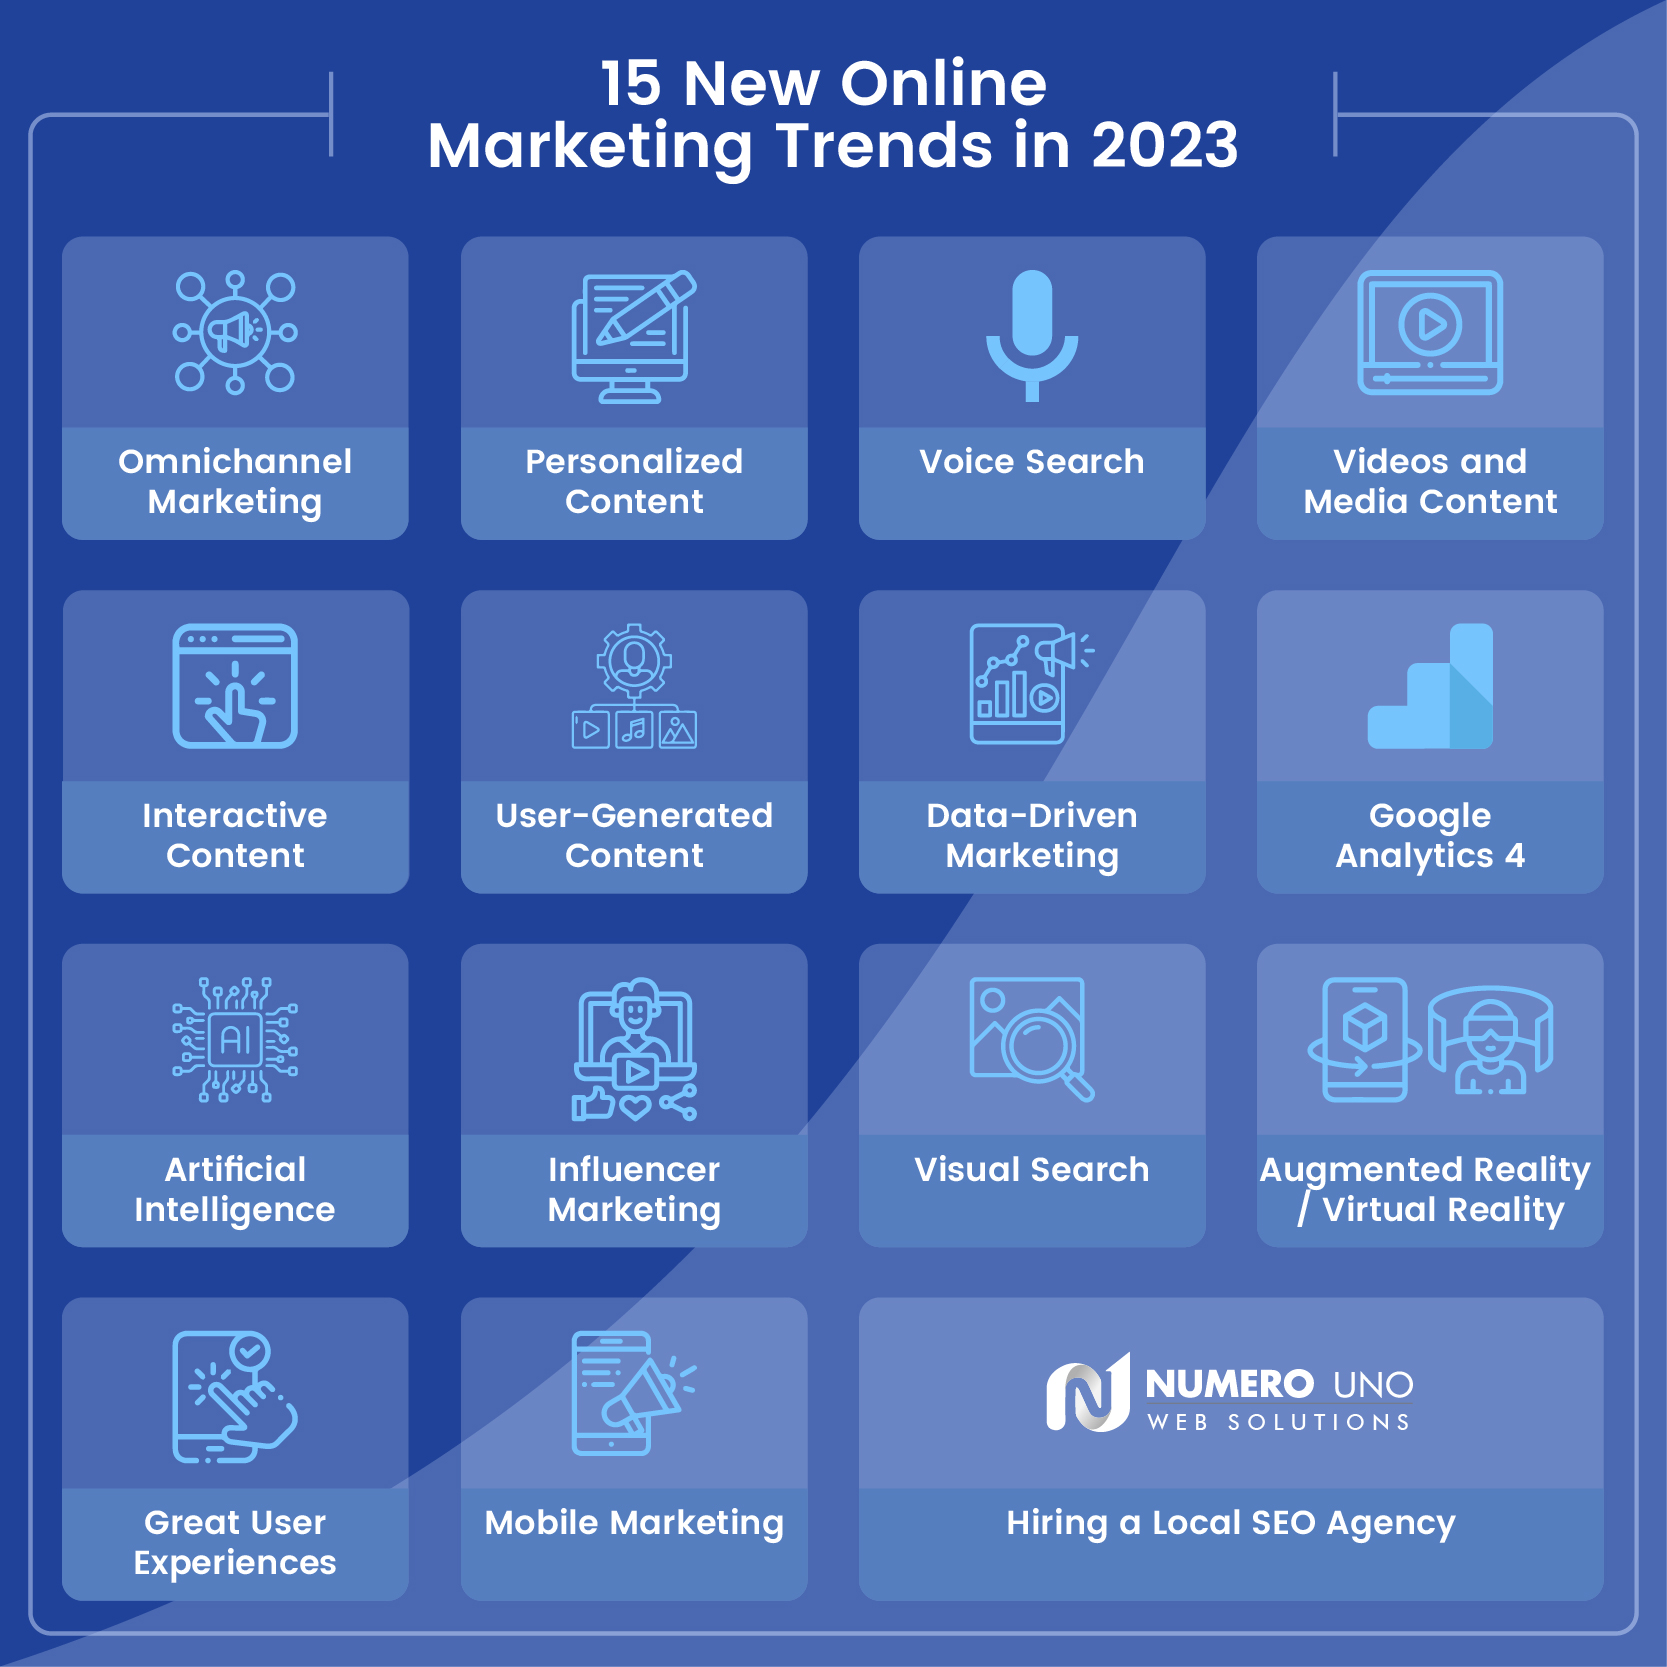 Digital Marketing Trends and Things to Expect in 2023